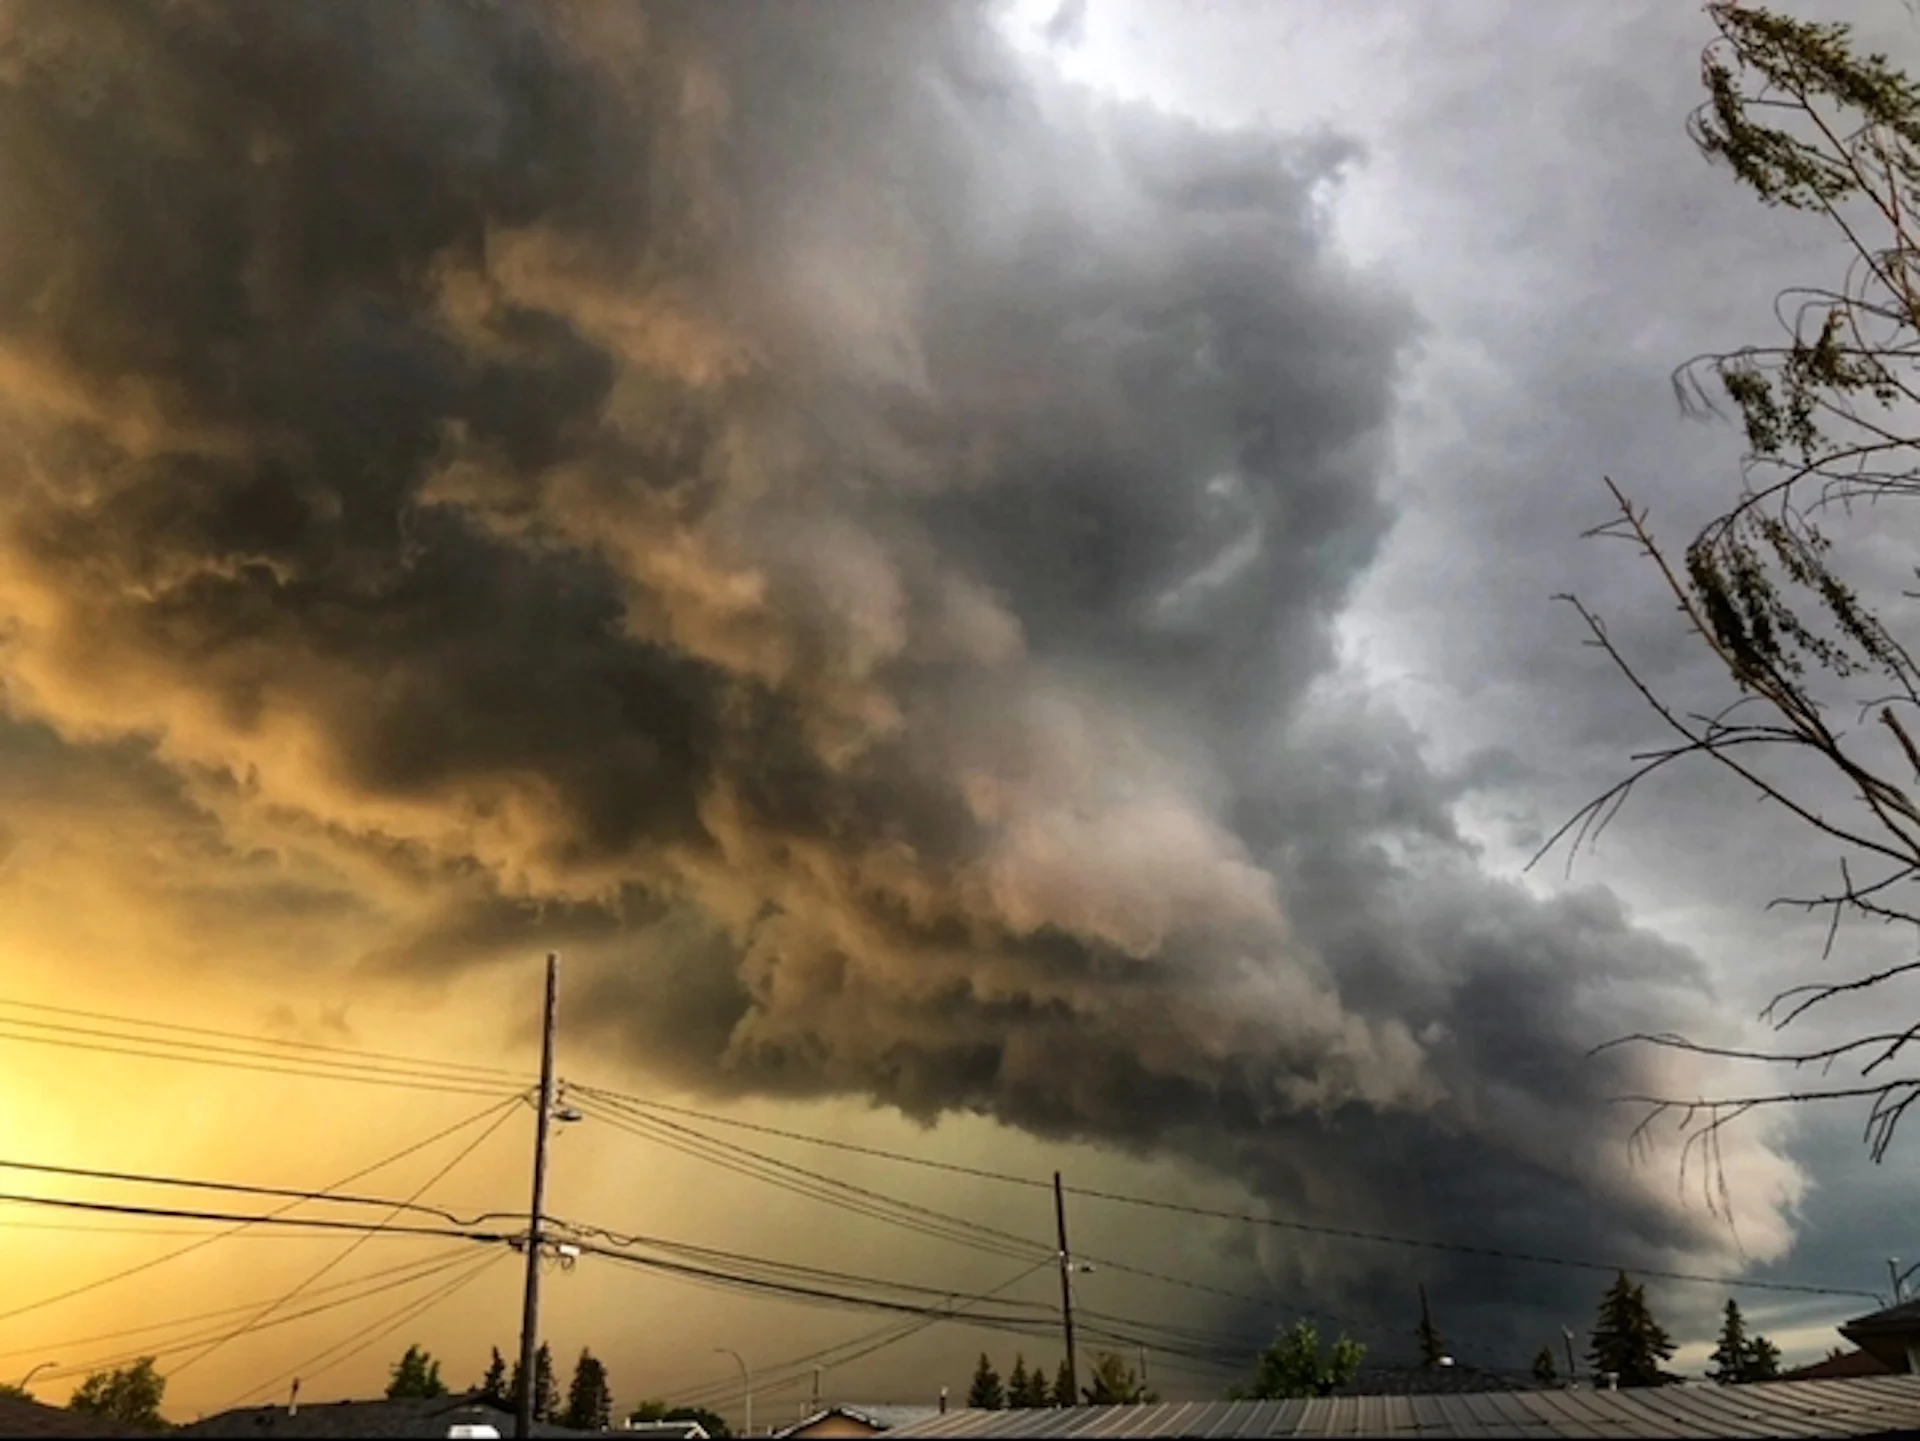 Rising potential for severe storms in Alberta as heat, humidity builds